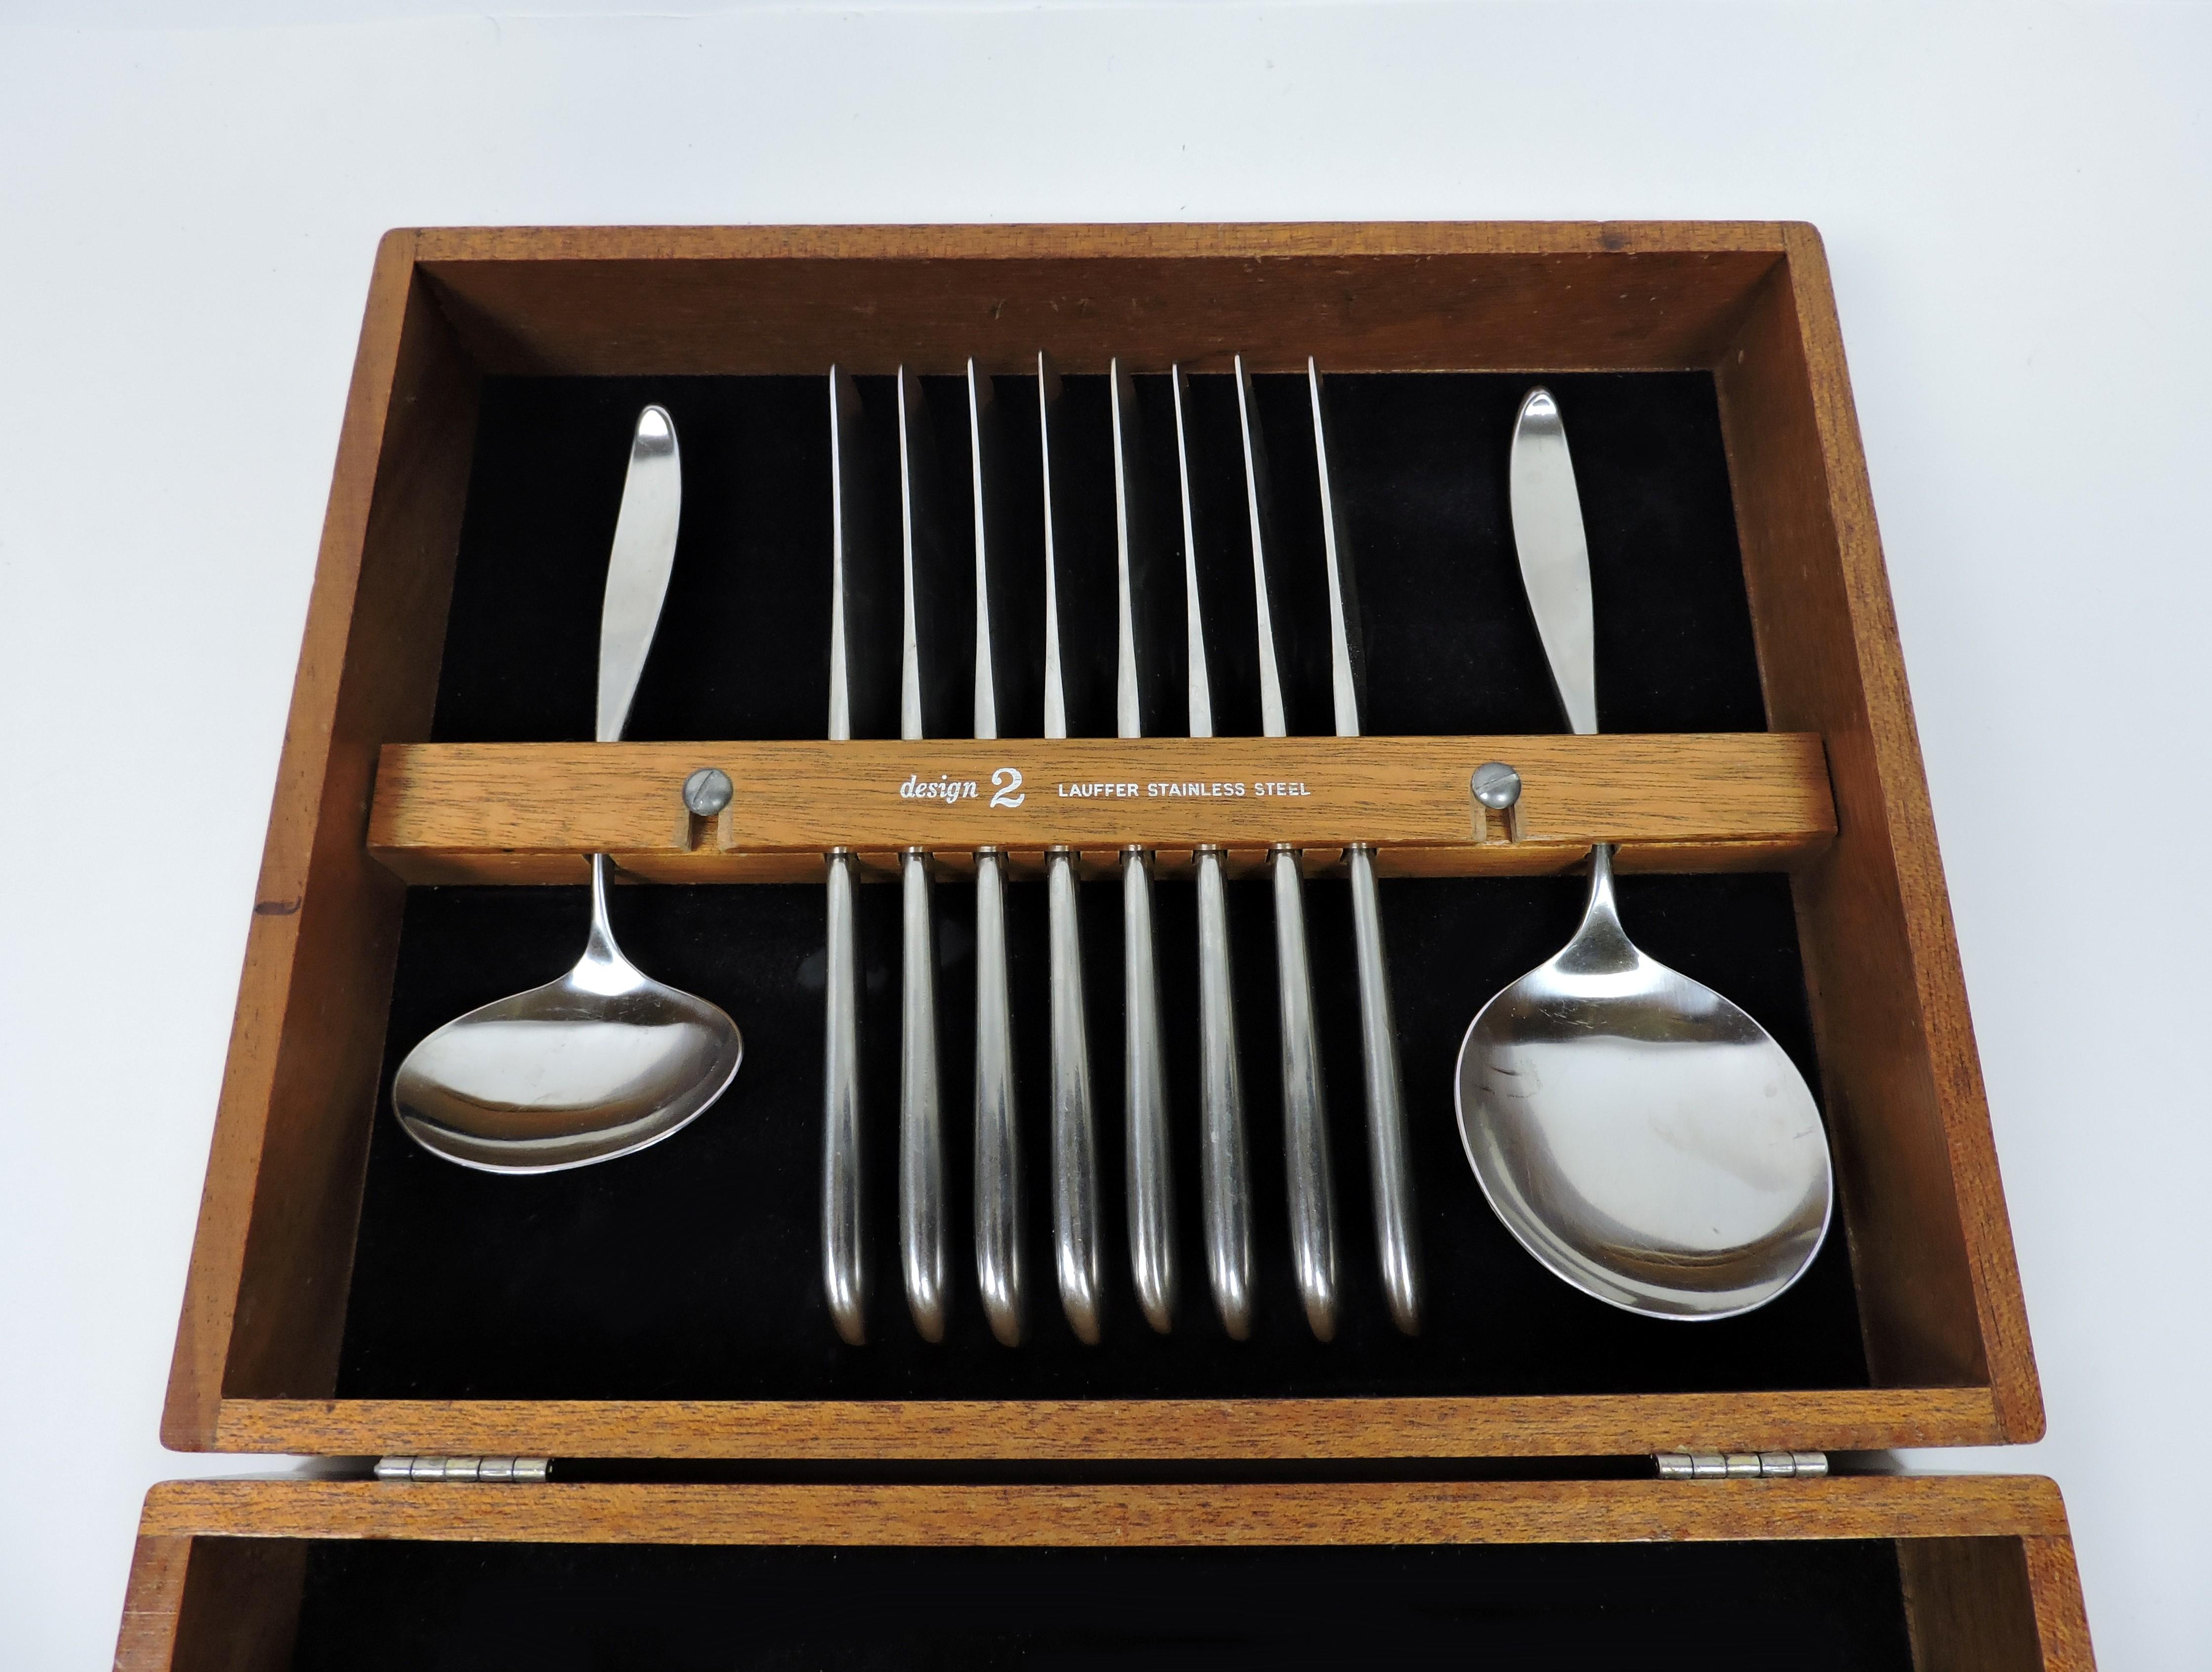 Beautiful 42 piece, service for eight, stainless steel flatware set in the Design 2 pattern manufactured by Lauffer. Originally designed in 1956 by the American industrial designer Don Wallance, it has a timeless look that will never go out of